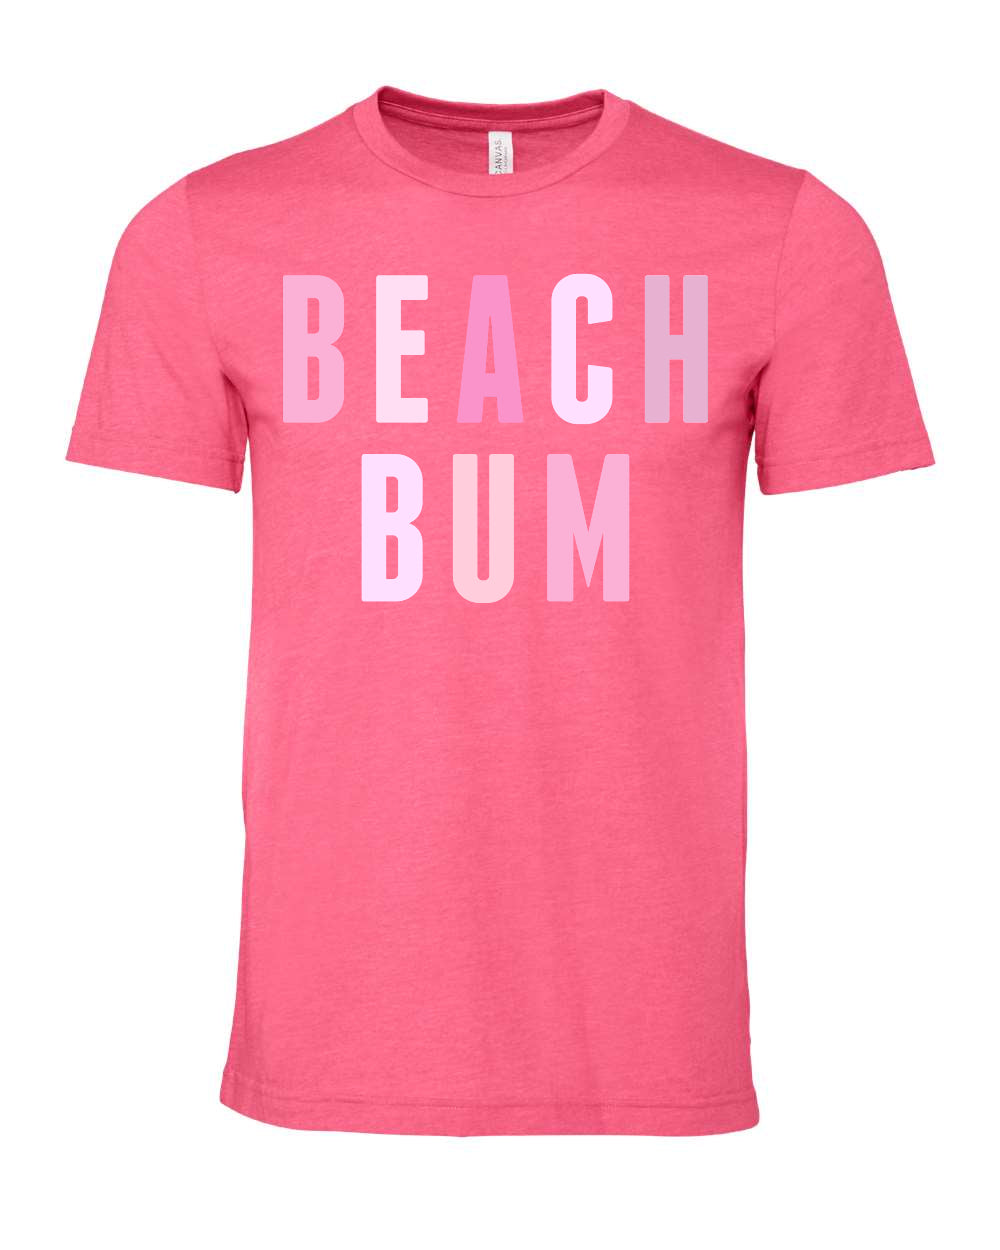 Beach Bum - SIZE UP 1-2 SIZES FOR A PERFECT COVER UP!